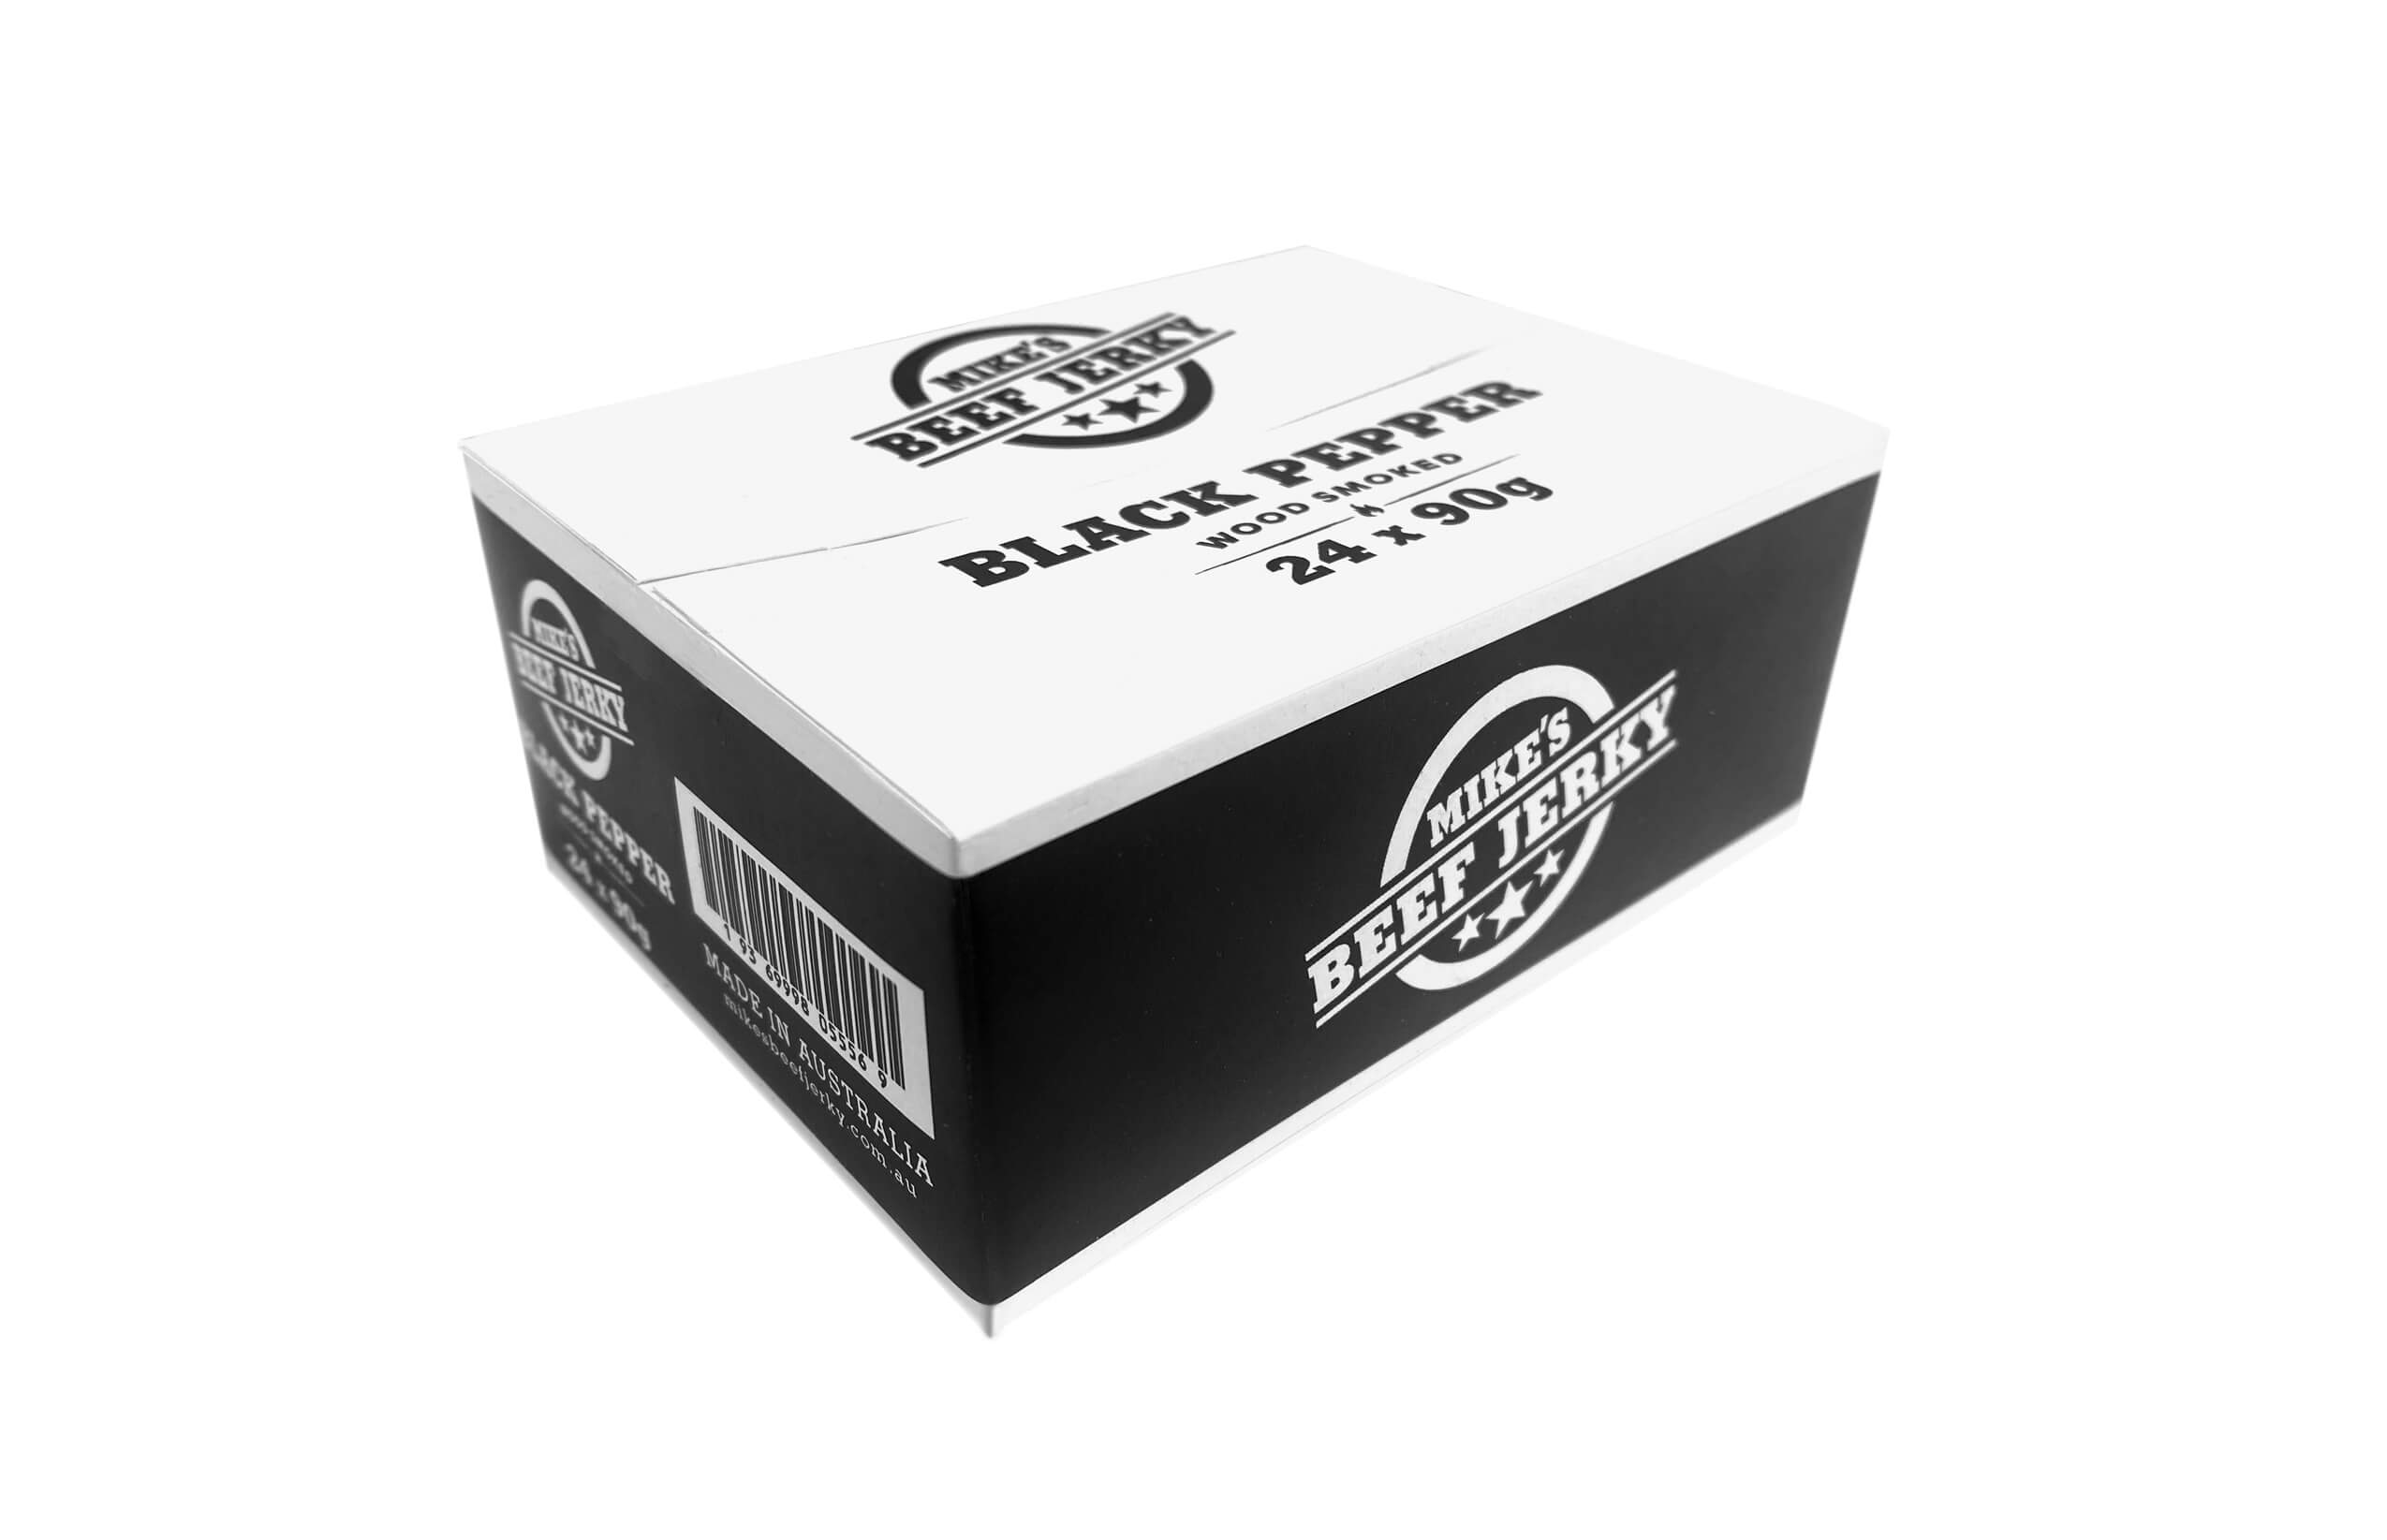 Icon Web Design Adelaide. Image of Mike's Beef Jerky black & white outer carton.